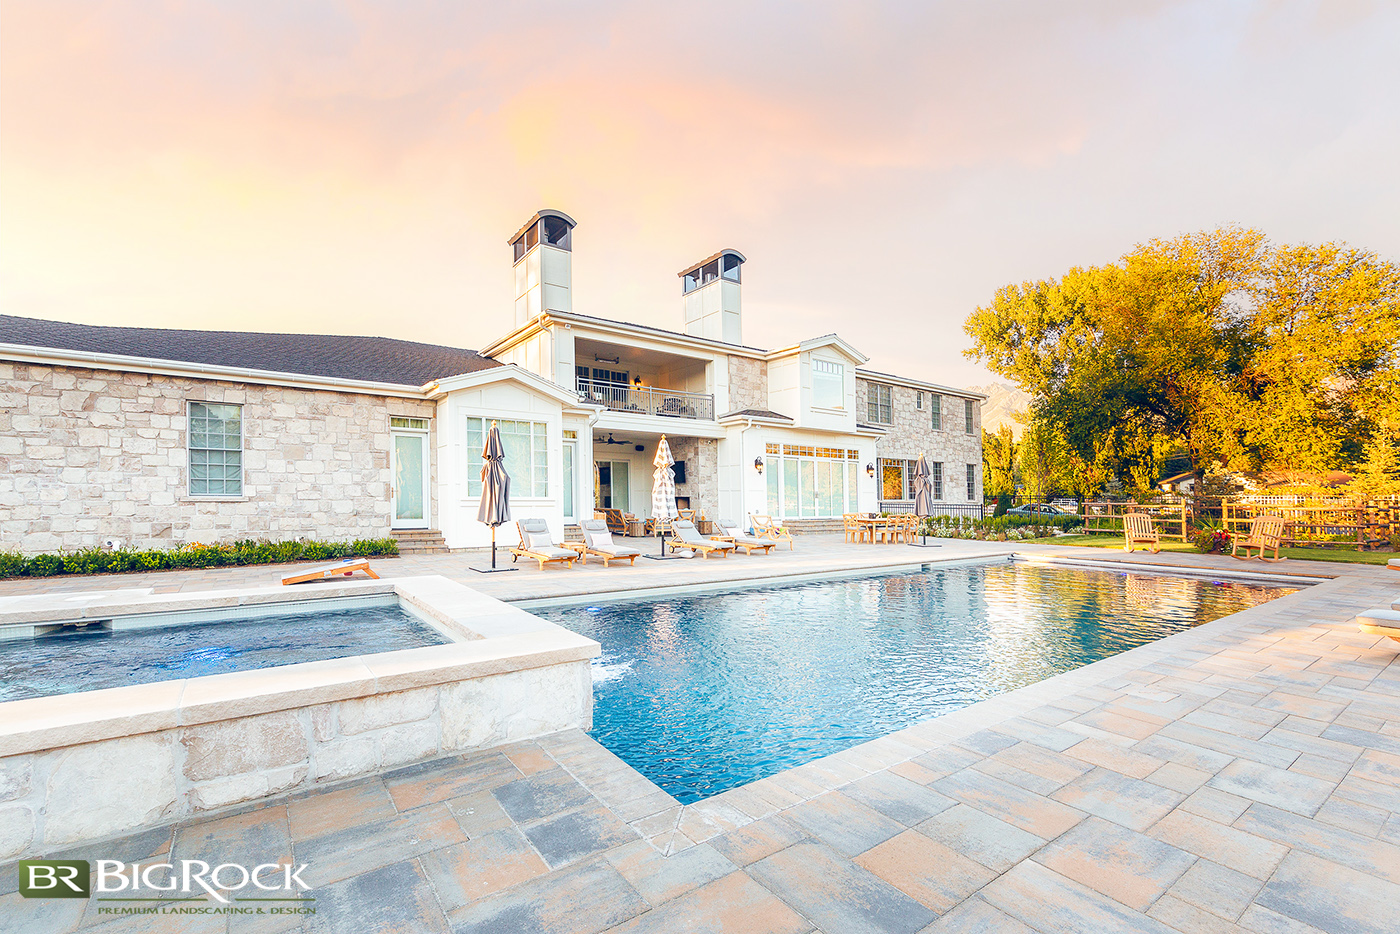 Designing your pool requires more than deciding the shape and size. In fact, there are technical questions you need to answer before you decide on the aesthetics of your pool.